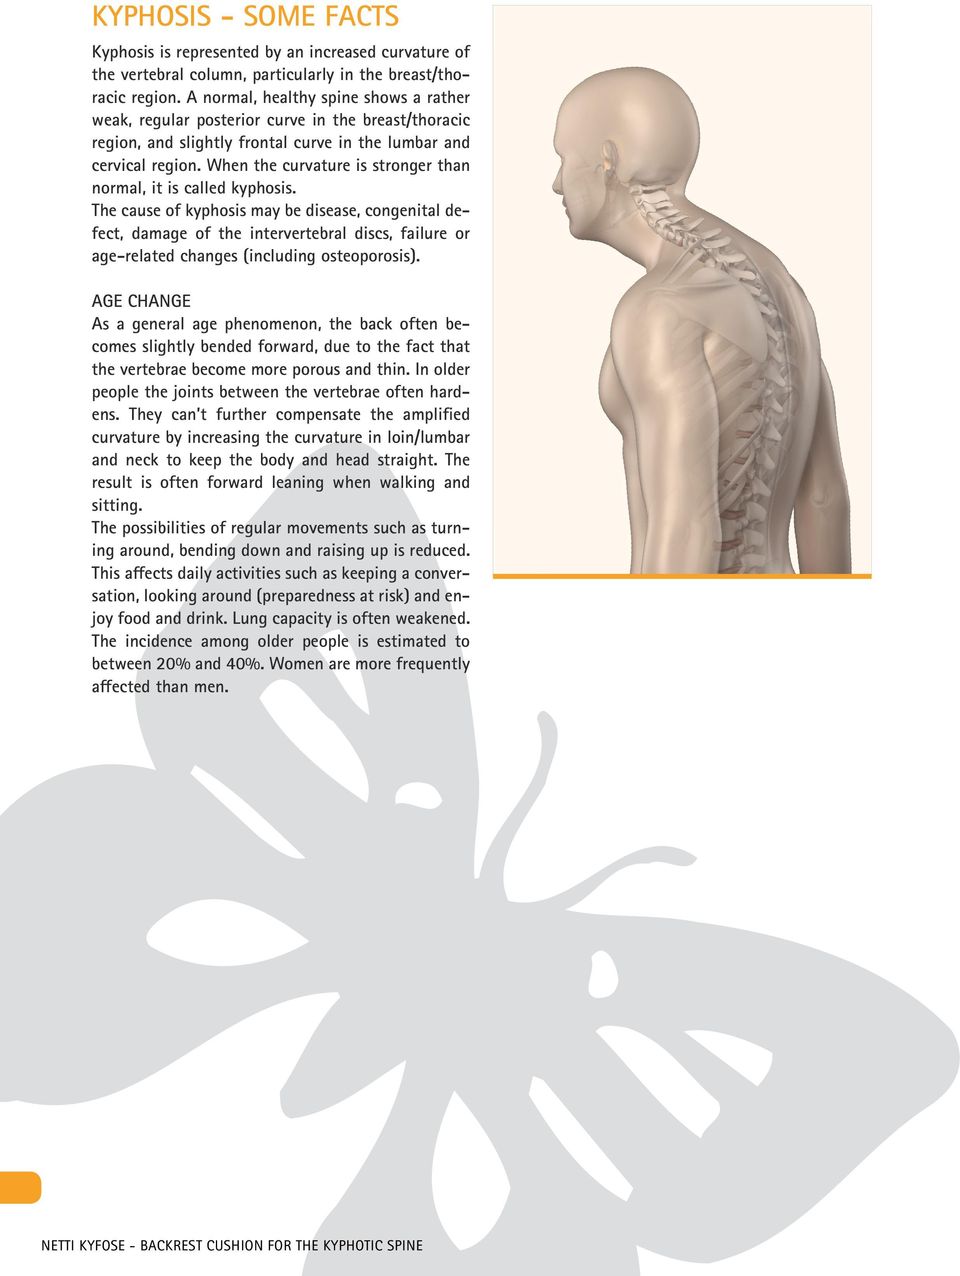 When the curvature is stronger than normal, it is called kyphosis.